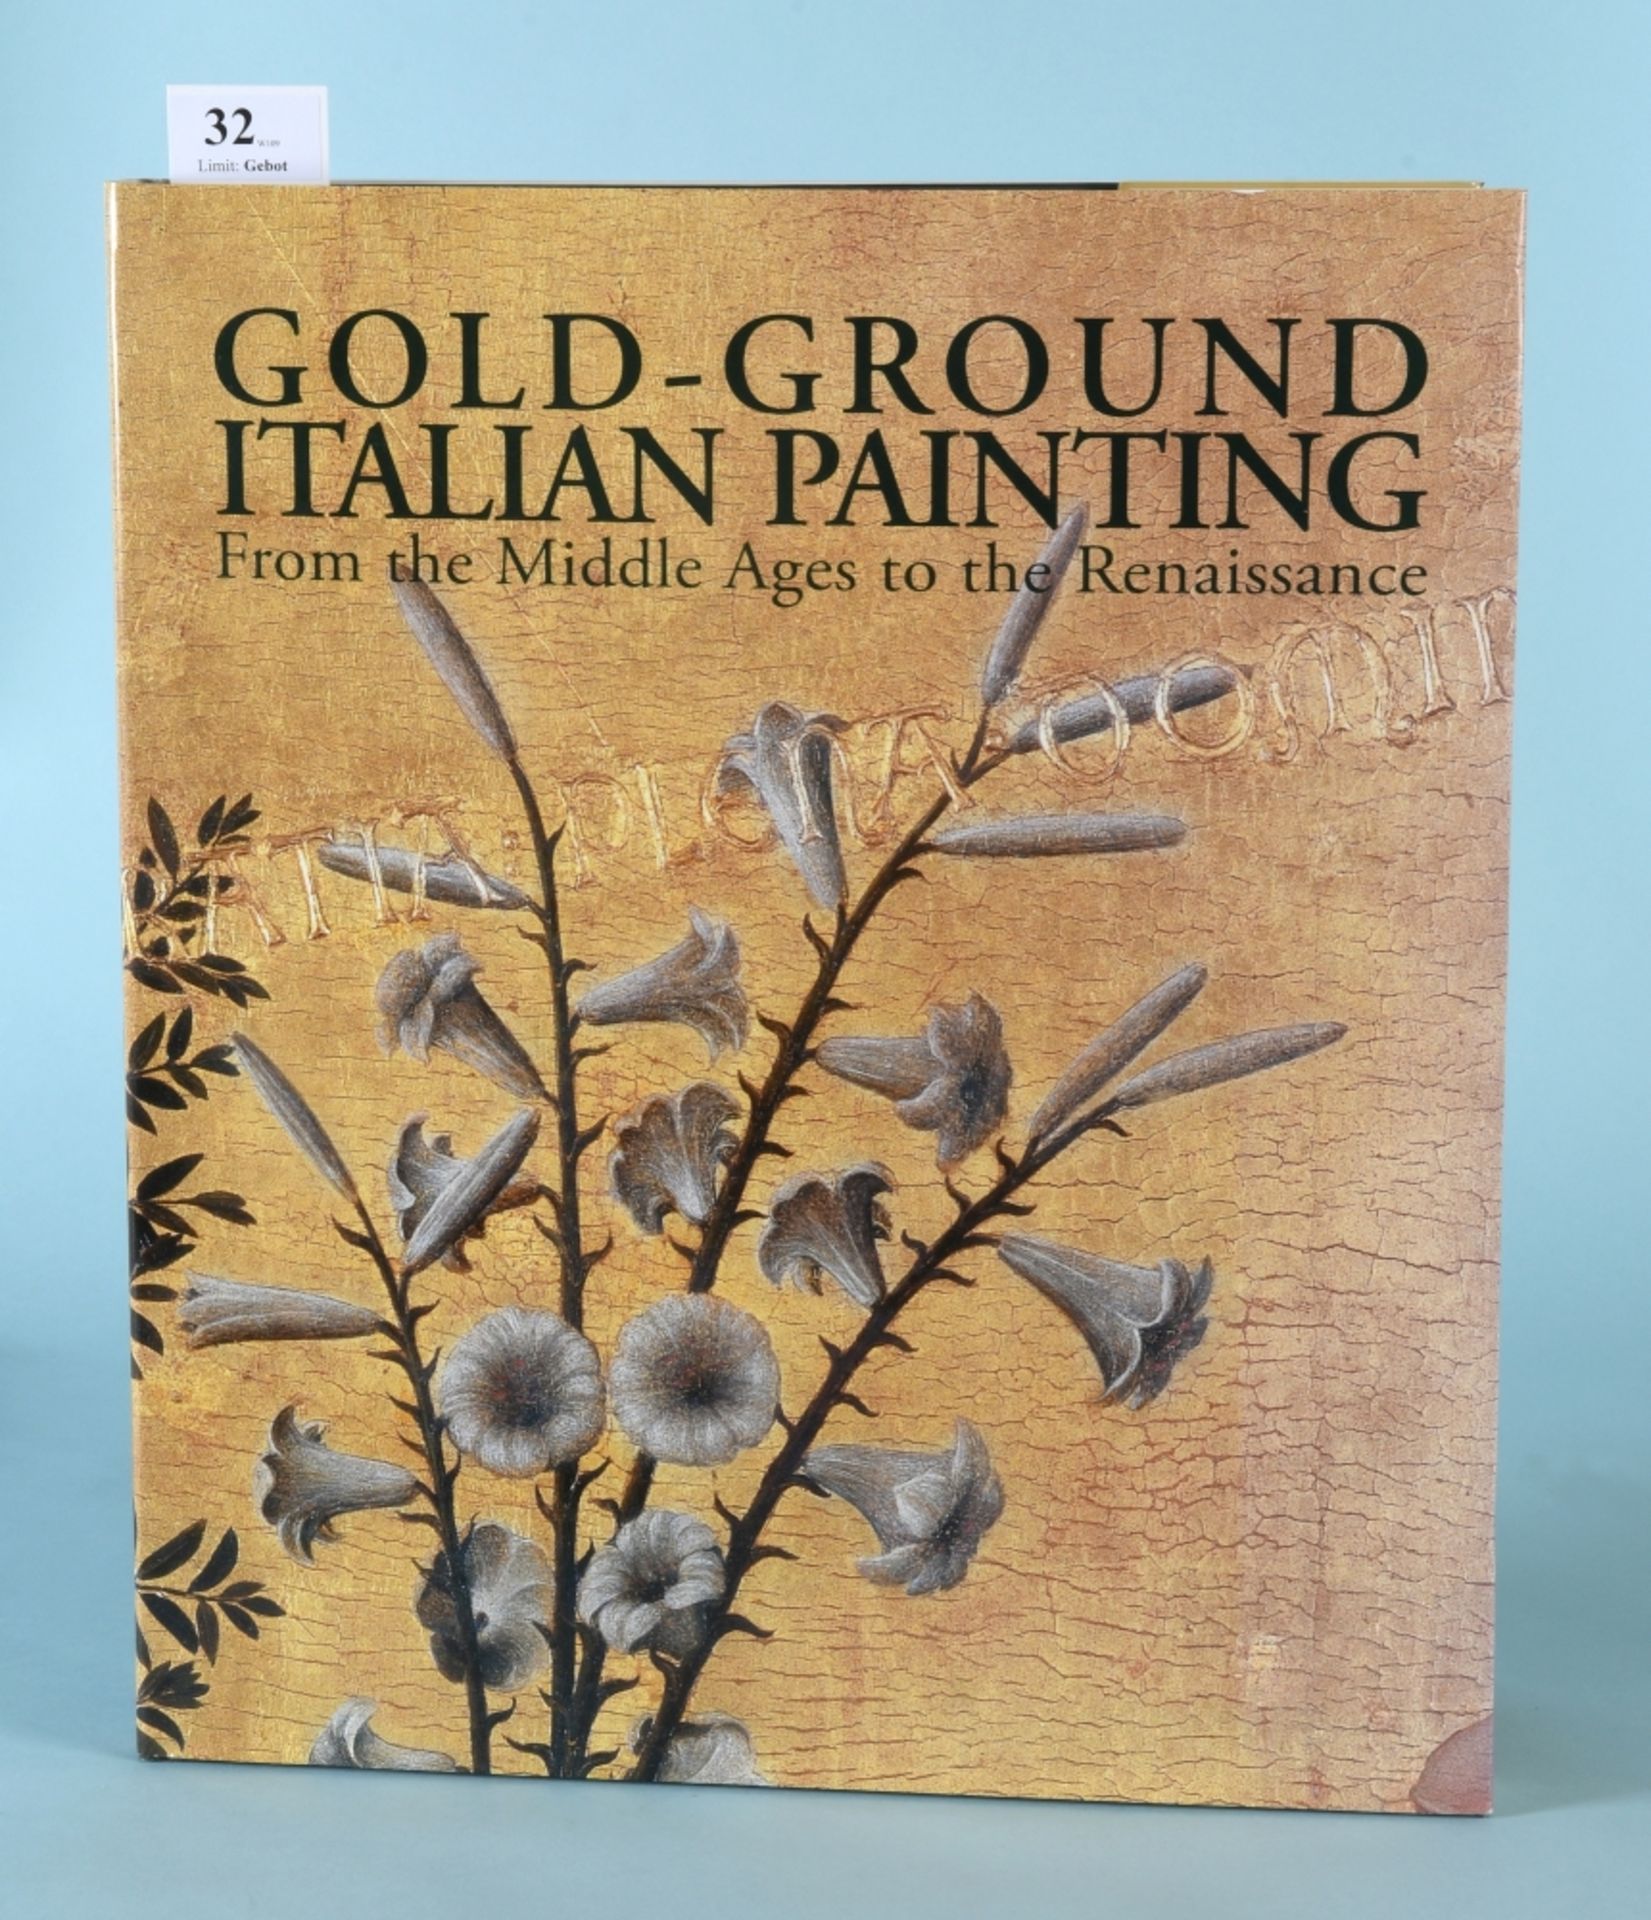 Gold-Ground Italian Painting - From the Middle Ages to the Renaissance